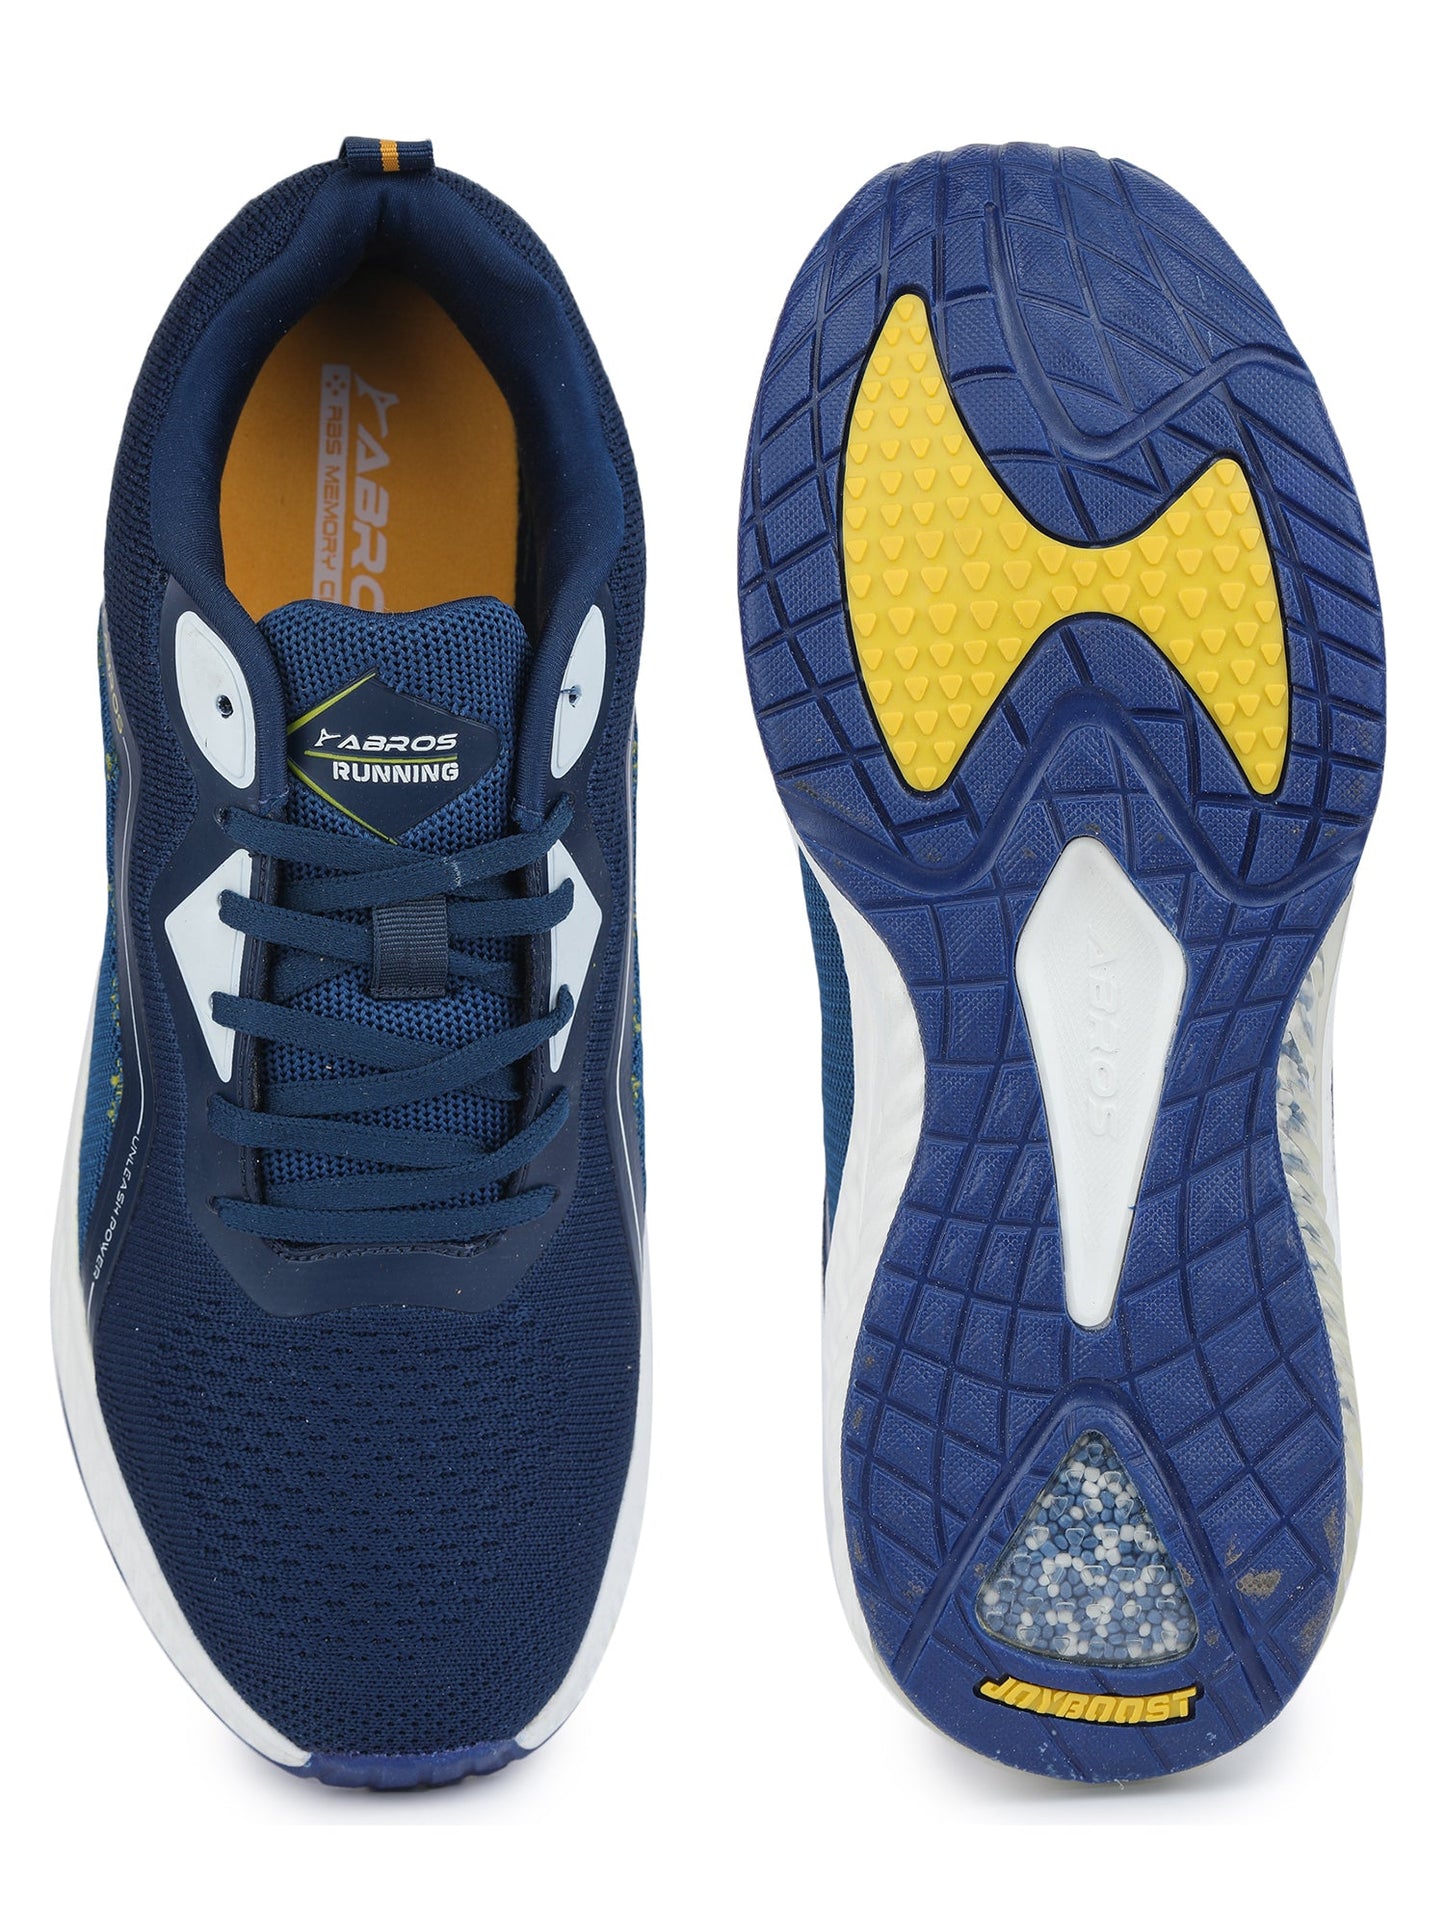 Martin Sport-Shoes  For Gents